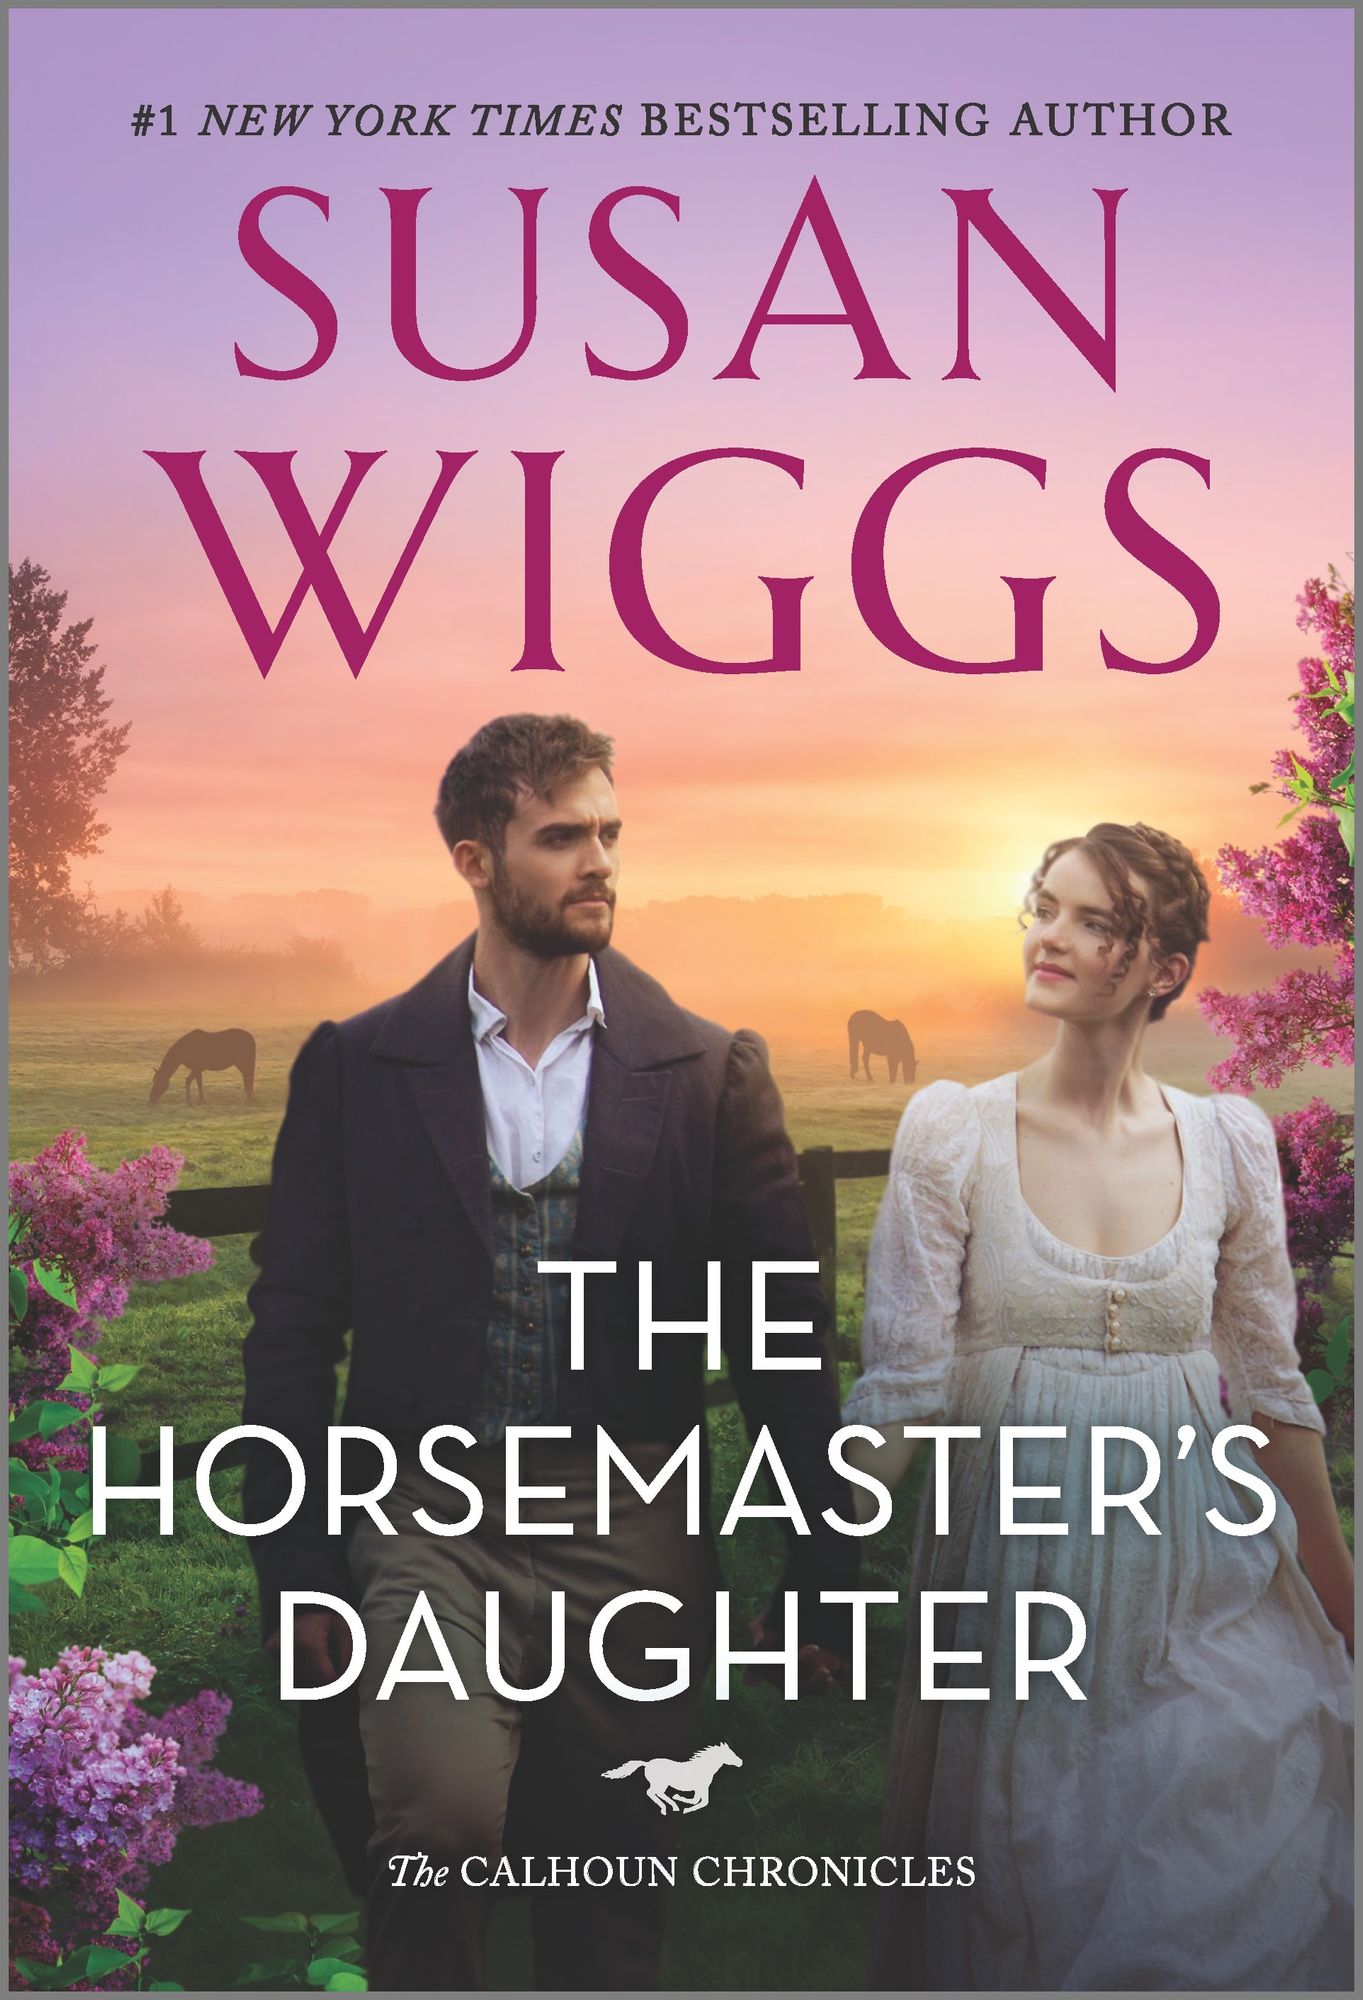 The Horseman's Daughter by Susan Wiggs